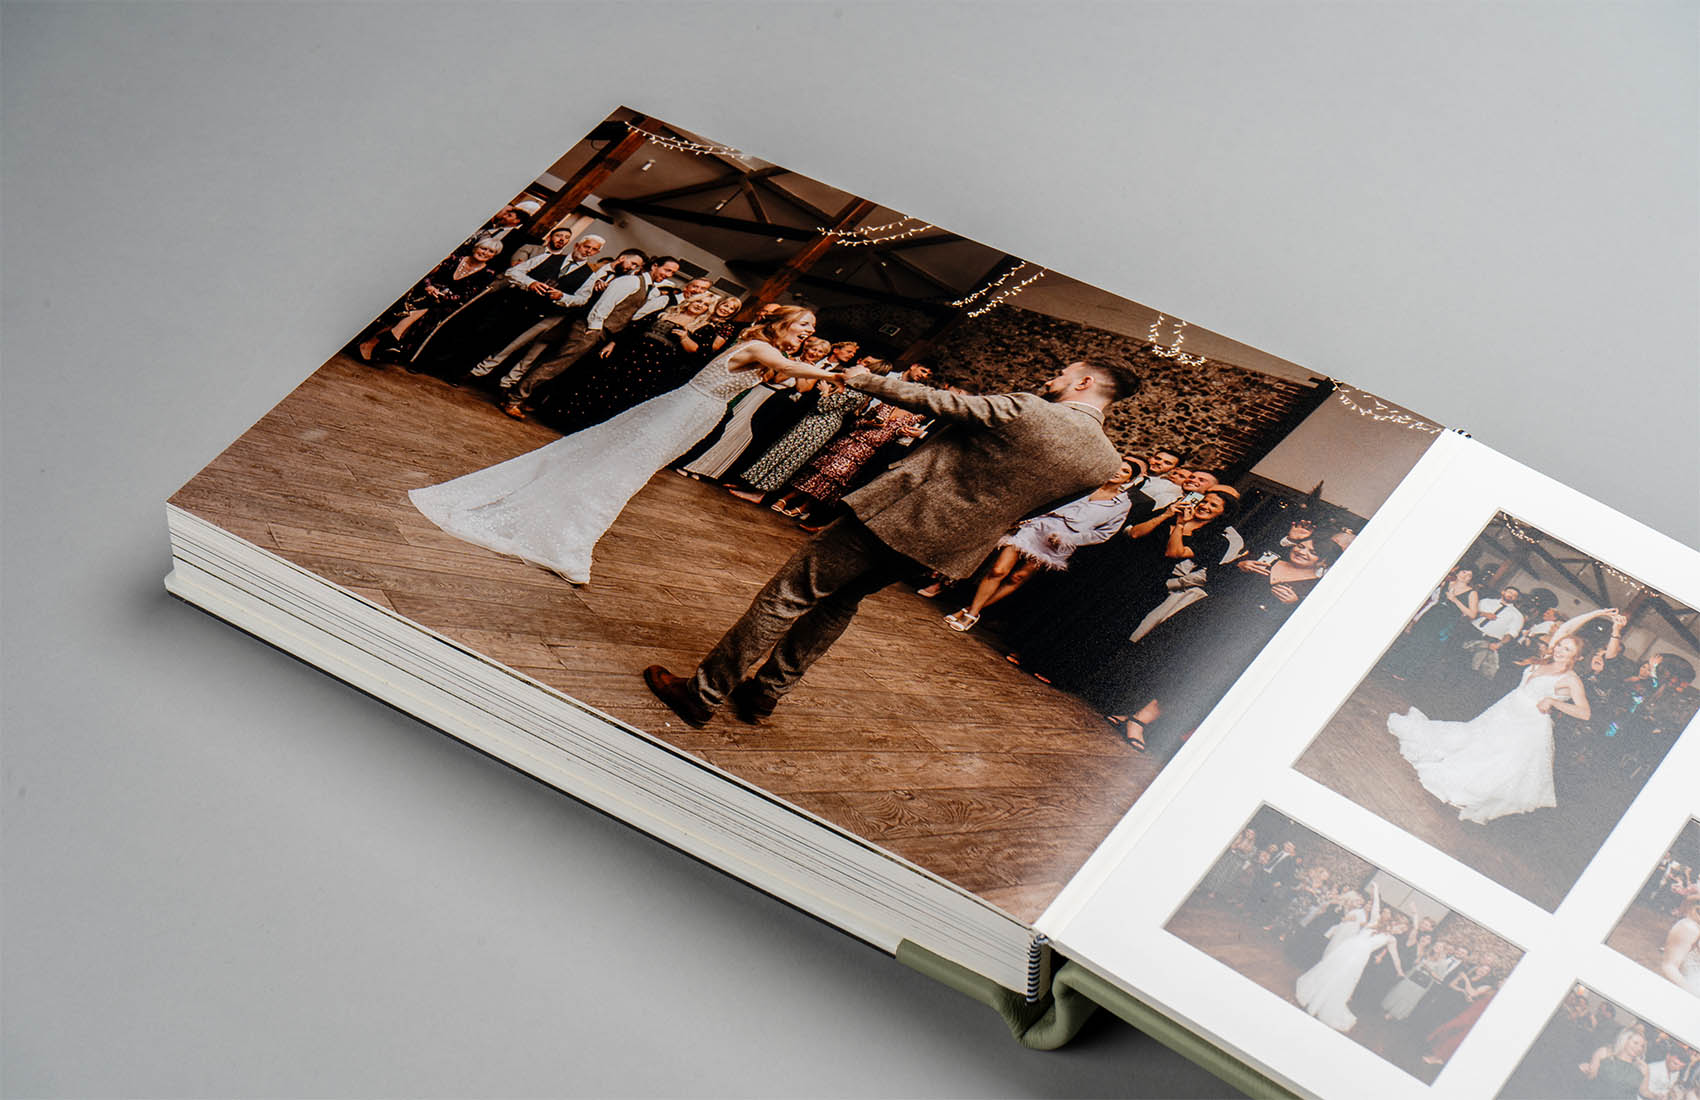 Custom Matted Photo Albums